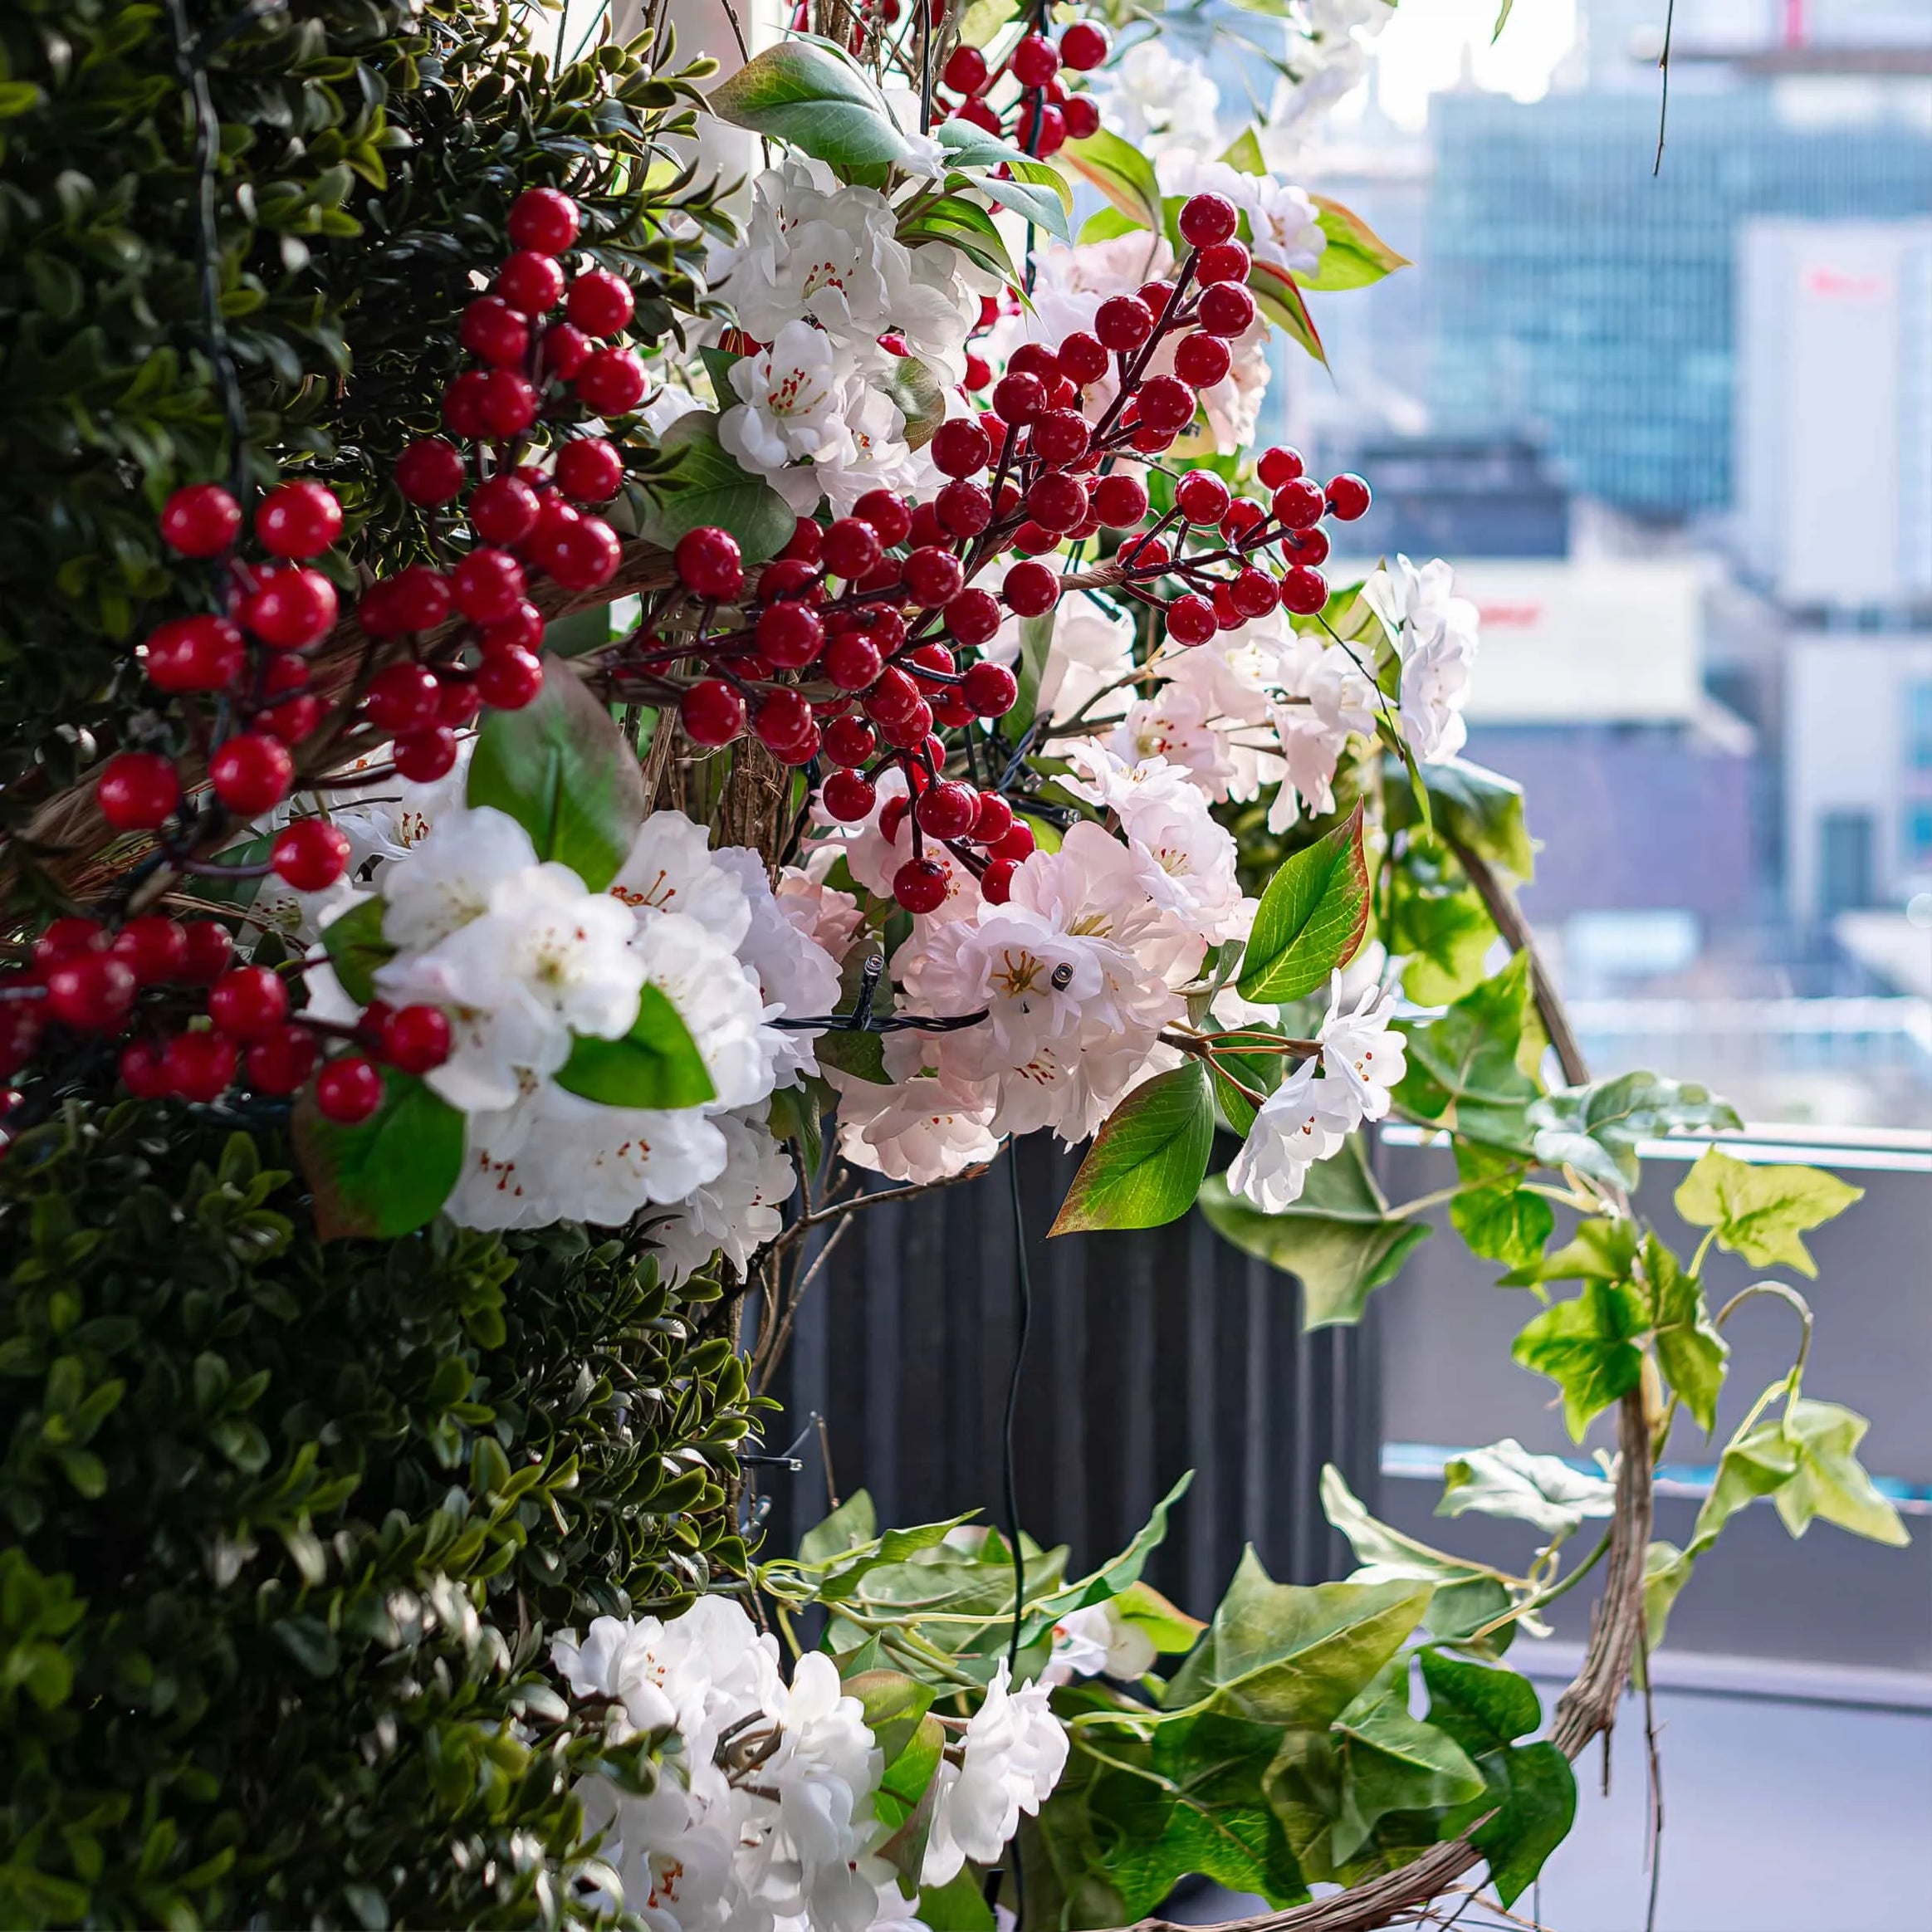 Vivid close-up of floral decoration with clusters of red berries and white flowers entwined with lush green leaves, set against an urban backdrop visible from the rooftop of STK Steakhouse.